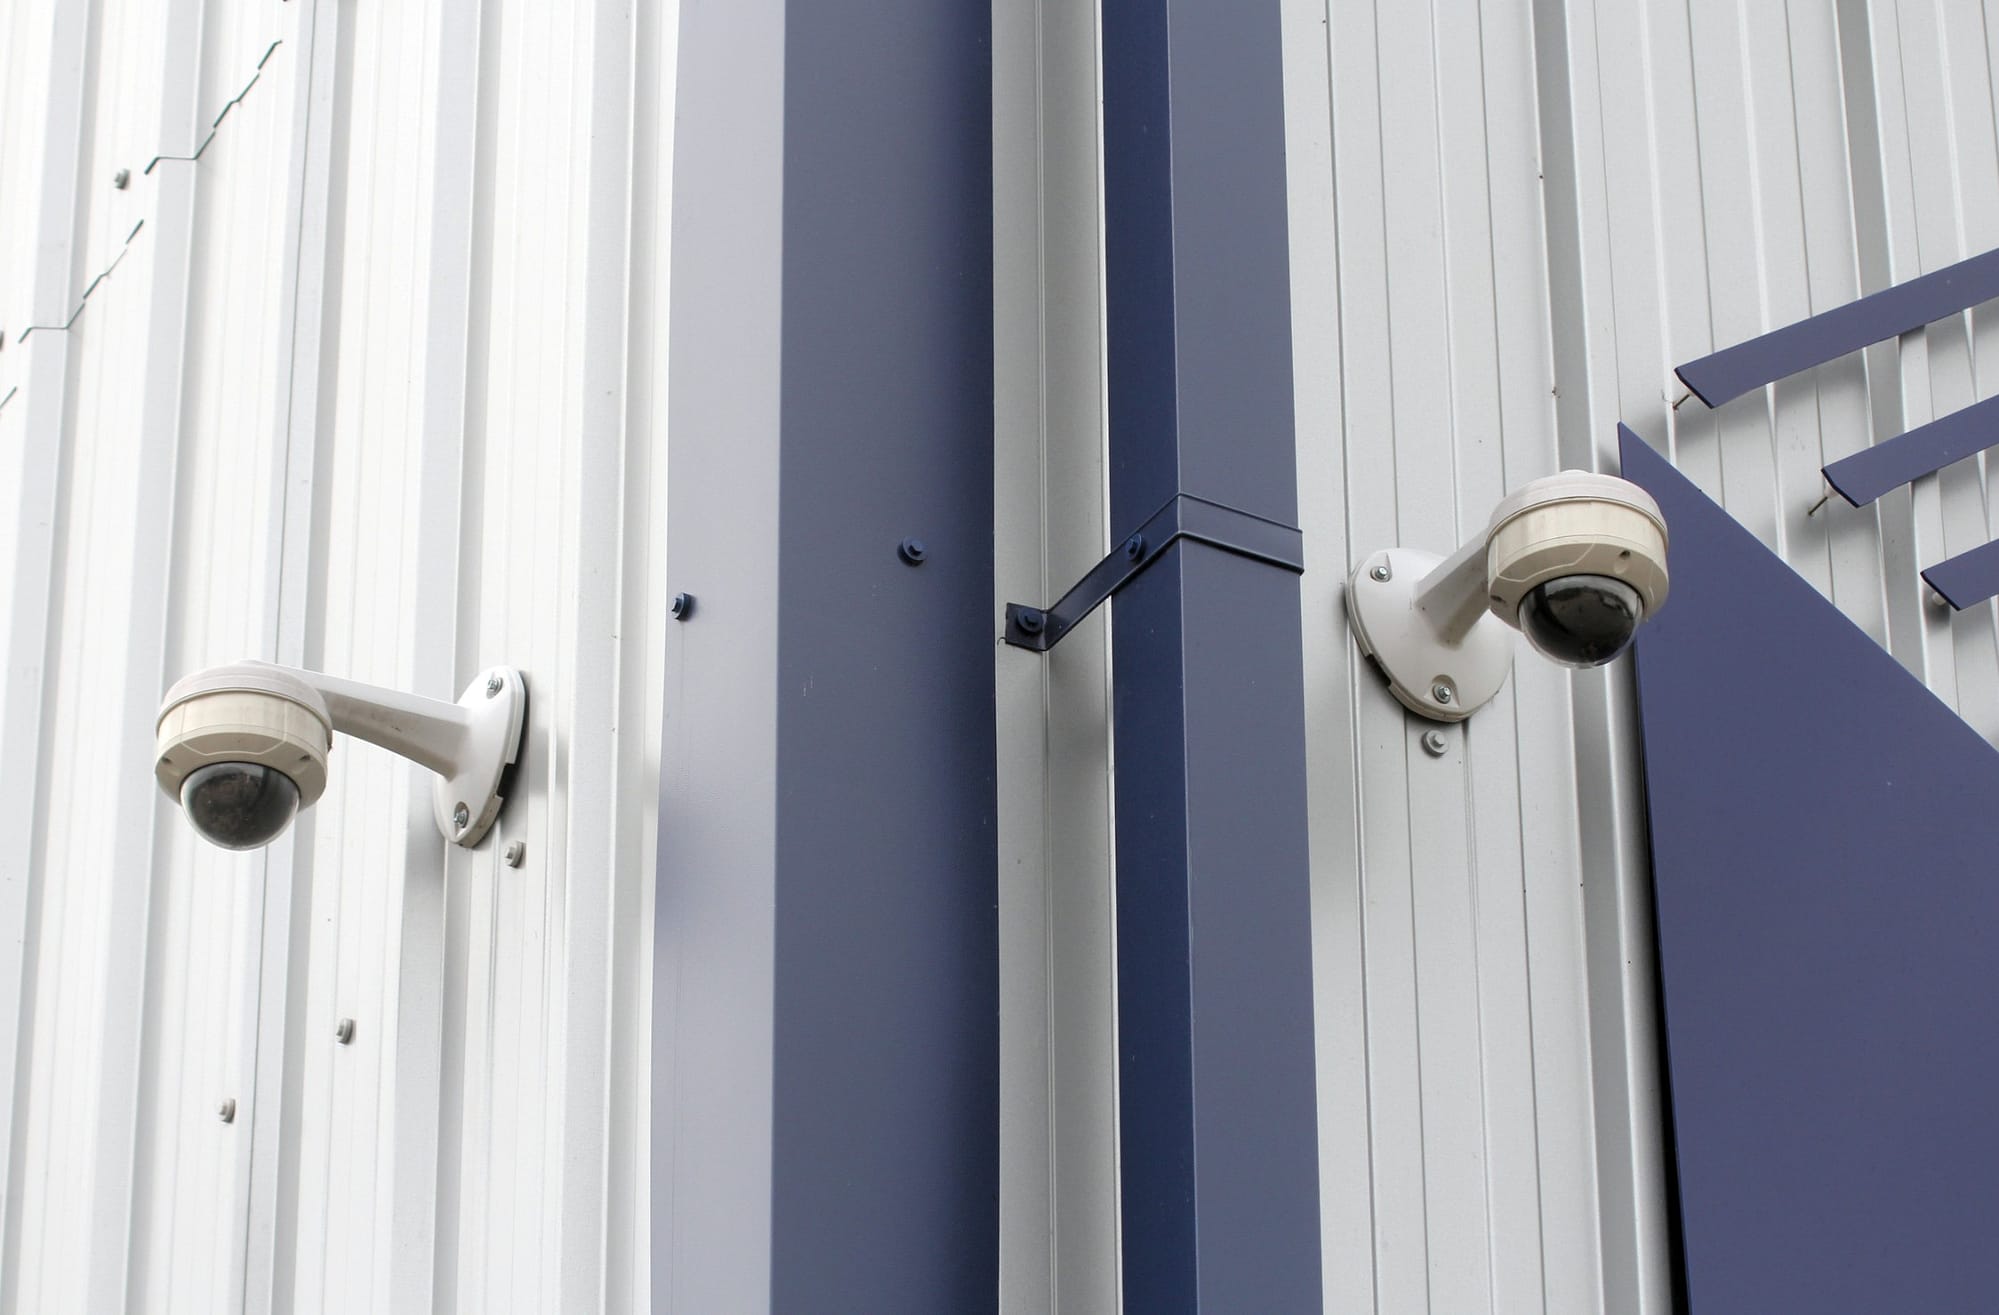 Secure storage facility with CCTV